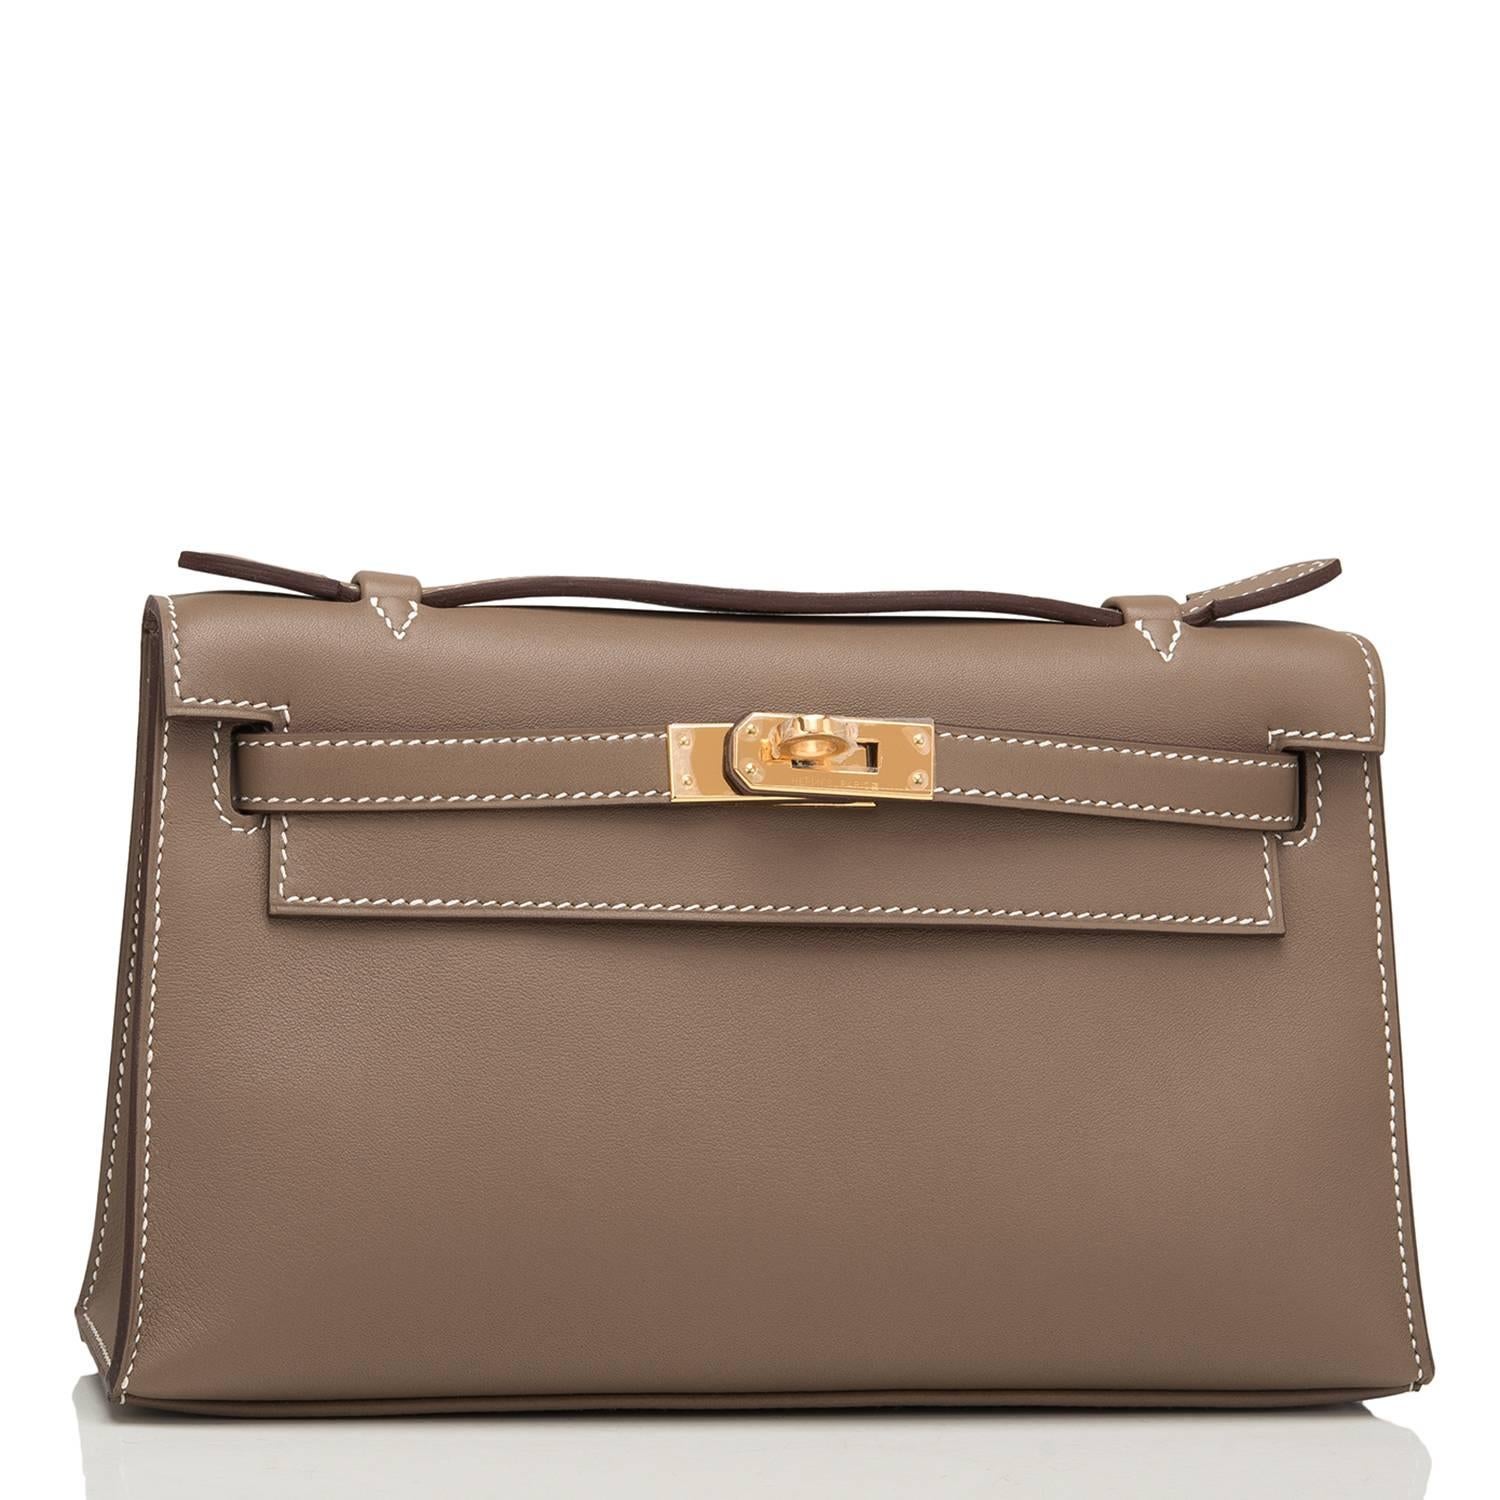 Hermes Etoupe Mini Kelly Pochette of swift leather with gold hardware.

This Hermes pochette has contrast stitching, a front flap with two straps, a toggle closure and a single flat handle.

The interior is lined with etoupe chevre and has one